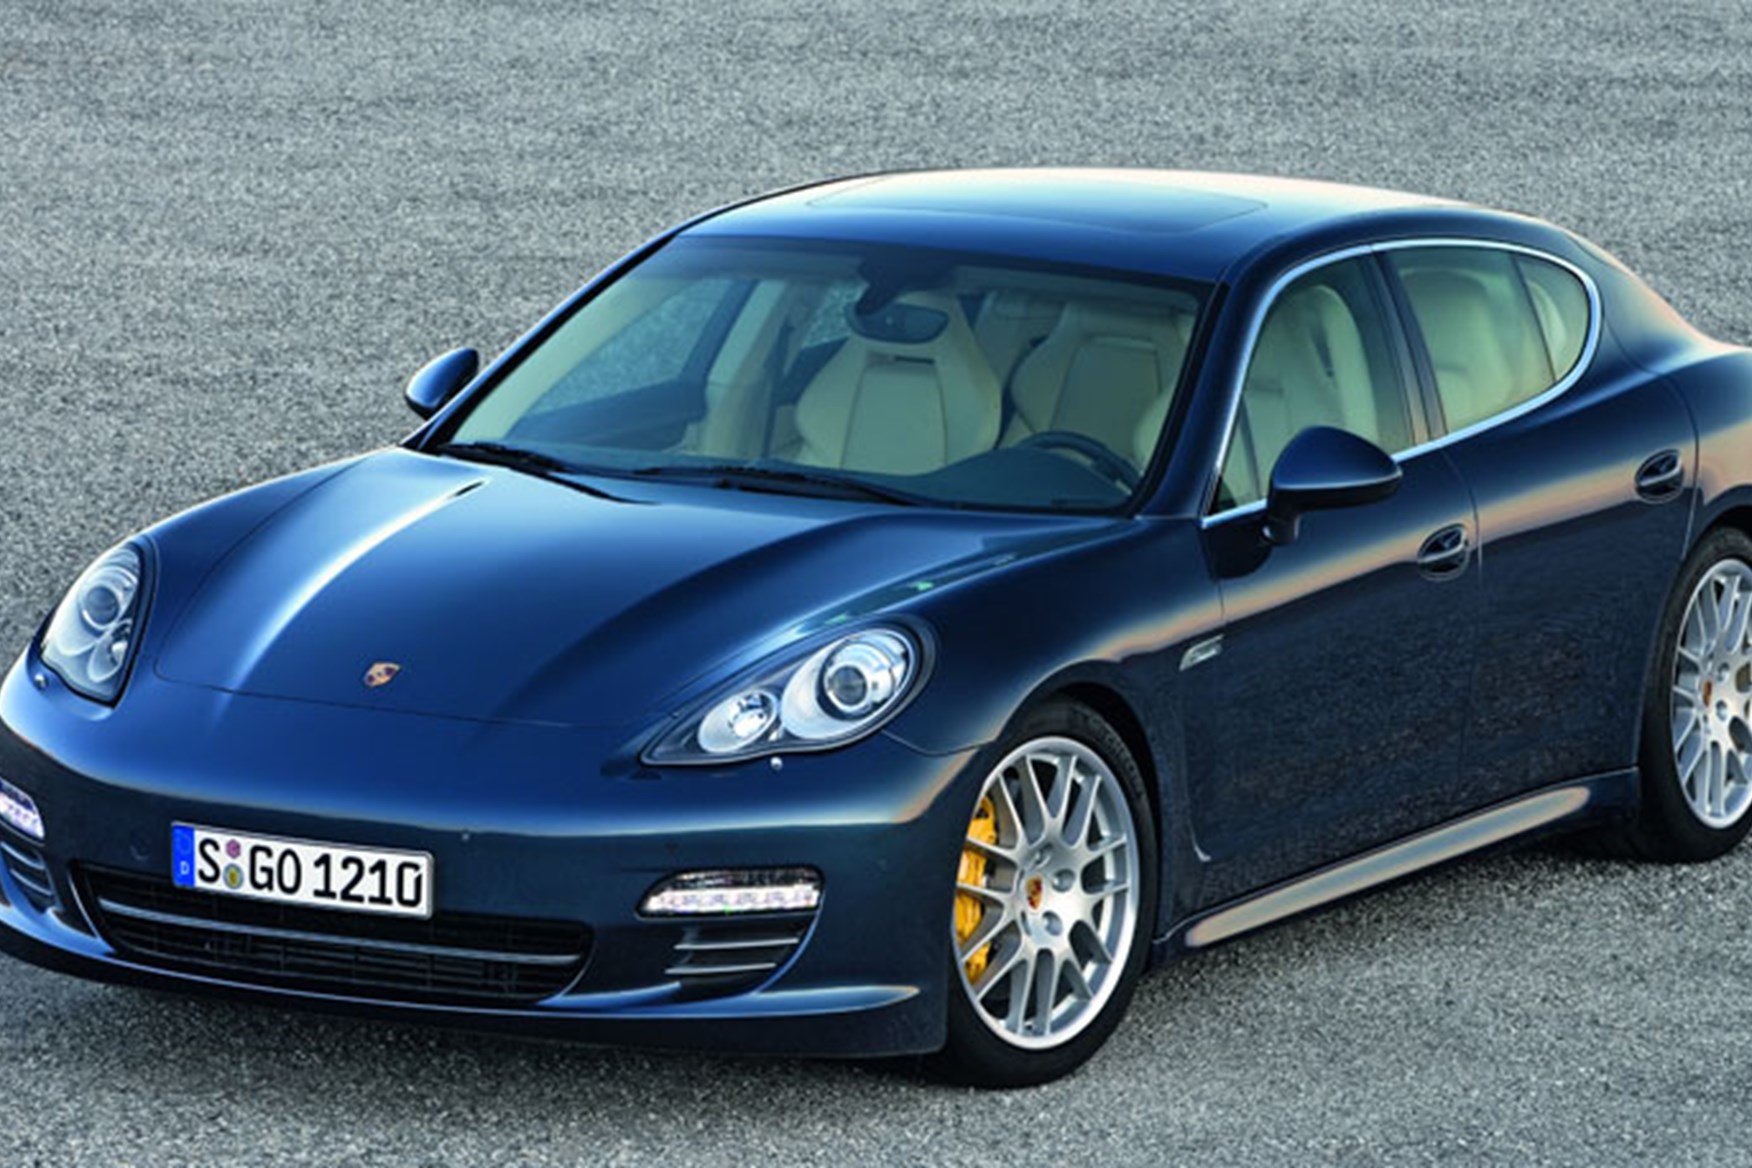 Details about   2009 Porsche Panamera First Official Images Un Opened